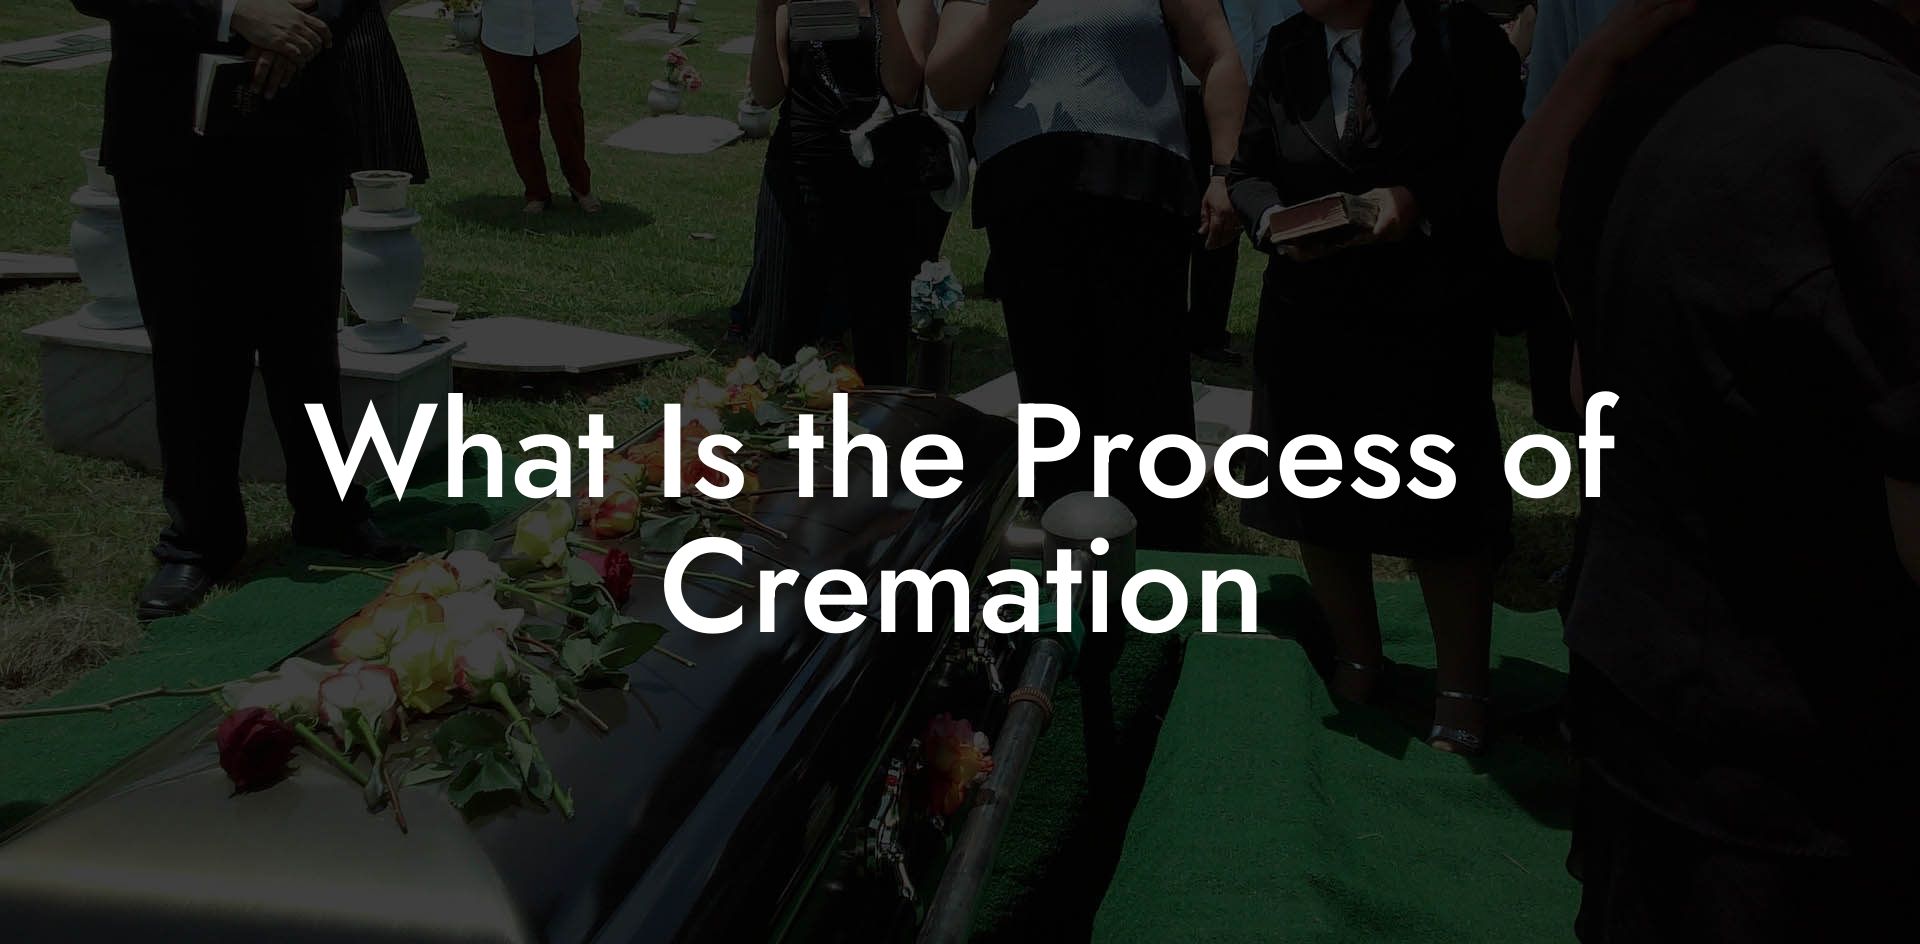 What Is the Process of Cremation